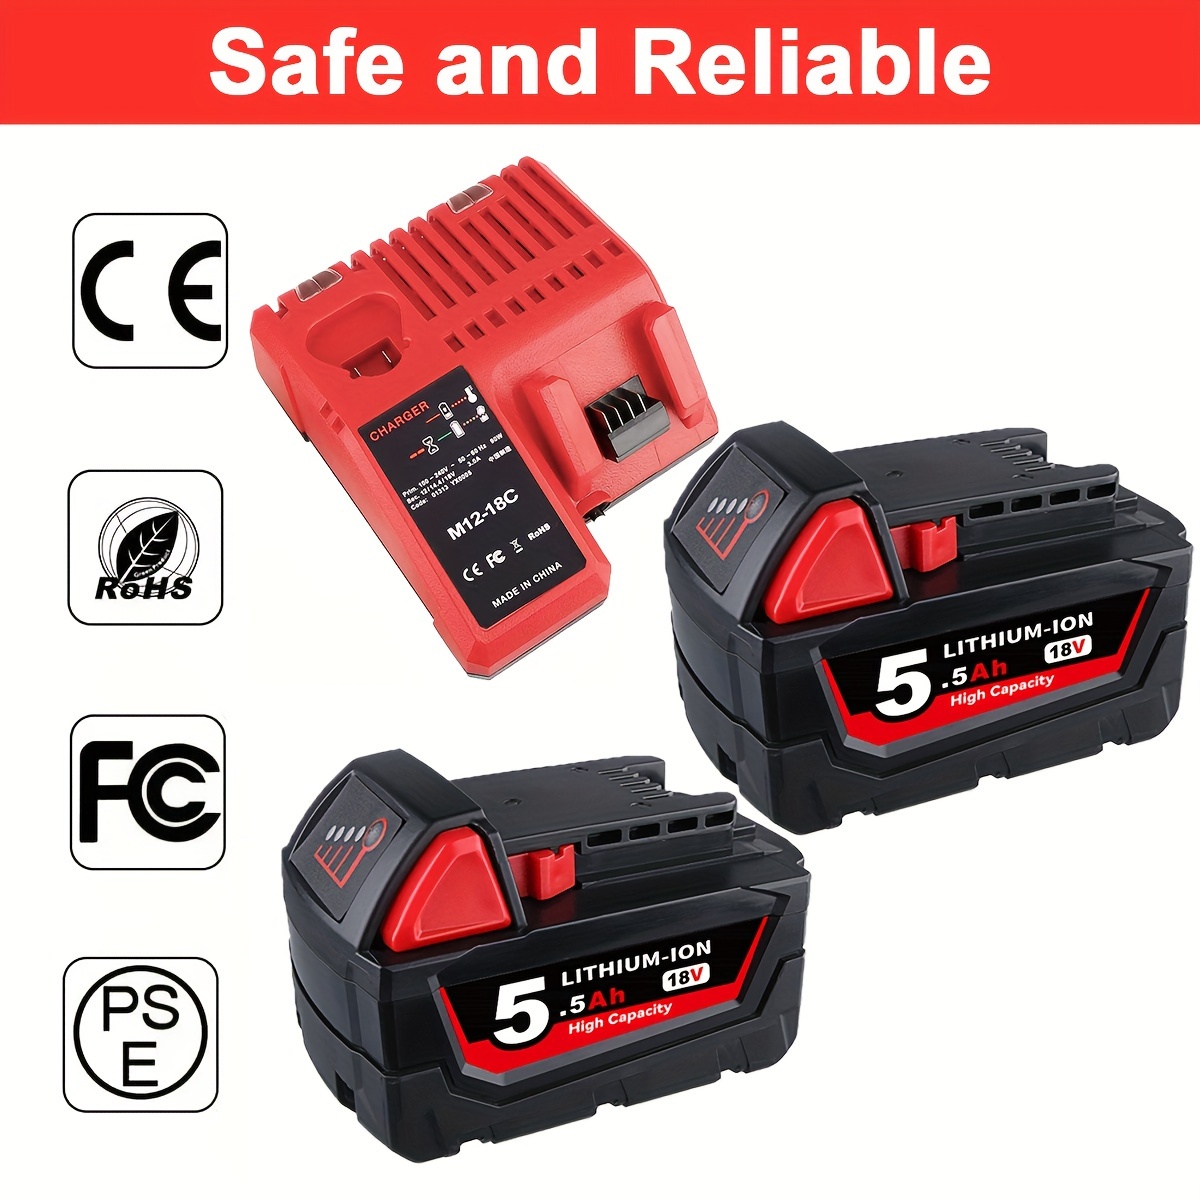 

2packs 5.5ah 18v Lithium Battery And Charger For 48-11-1820 48-11-1850 48-11-1852 48-11-1860 48-11-1820 48-11-1840 Cordless Power Tools Batteries Capacity Output 5500mah